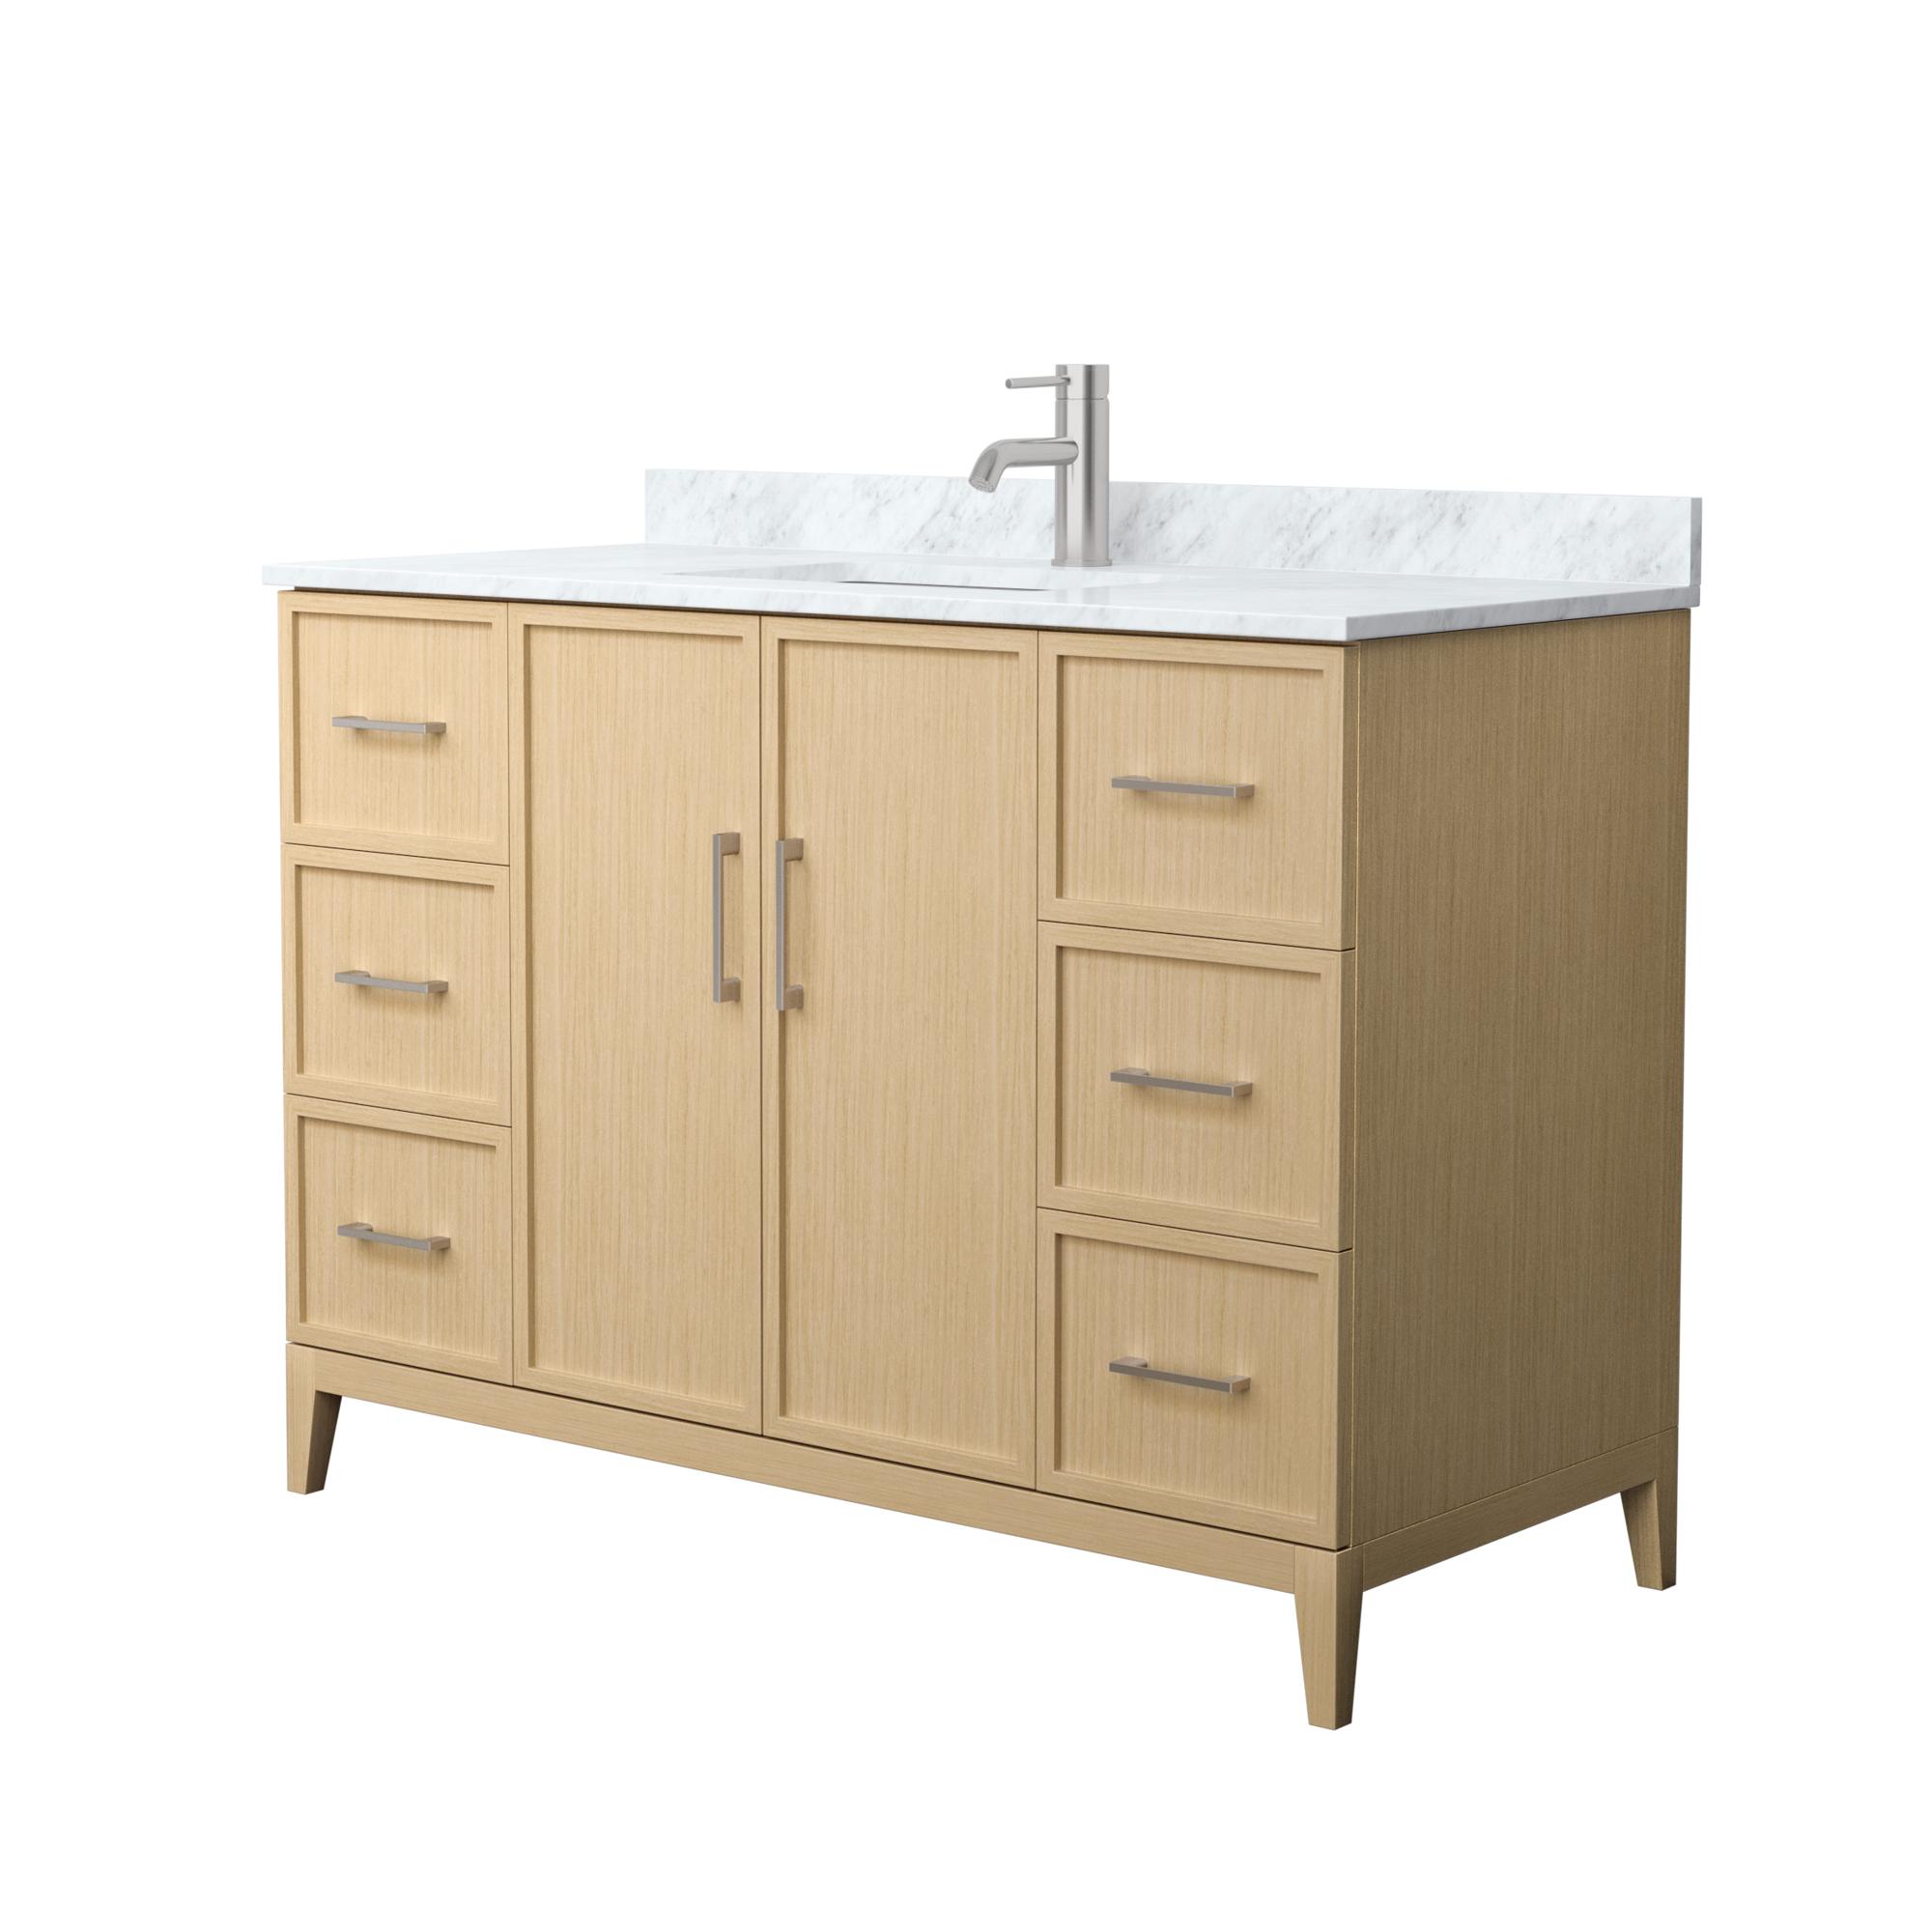 48" Transitional Single Vanity Base in White Oak, 7 Top Options with 2 Hardware Option